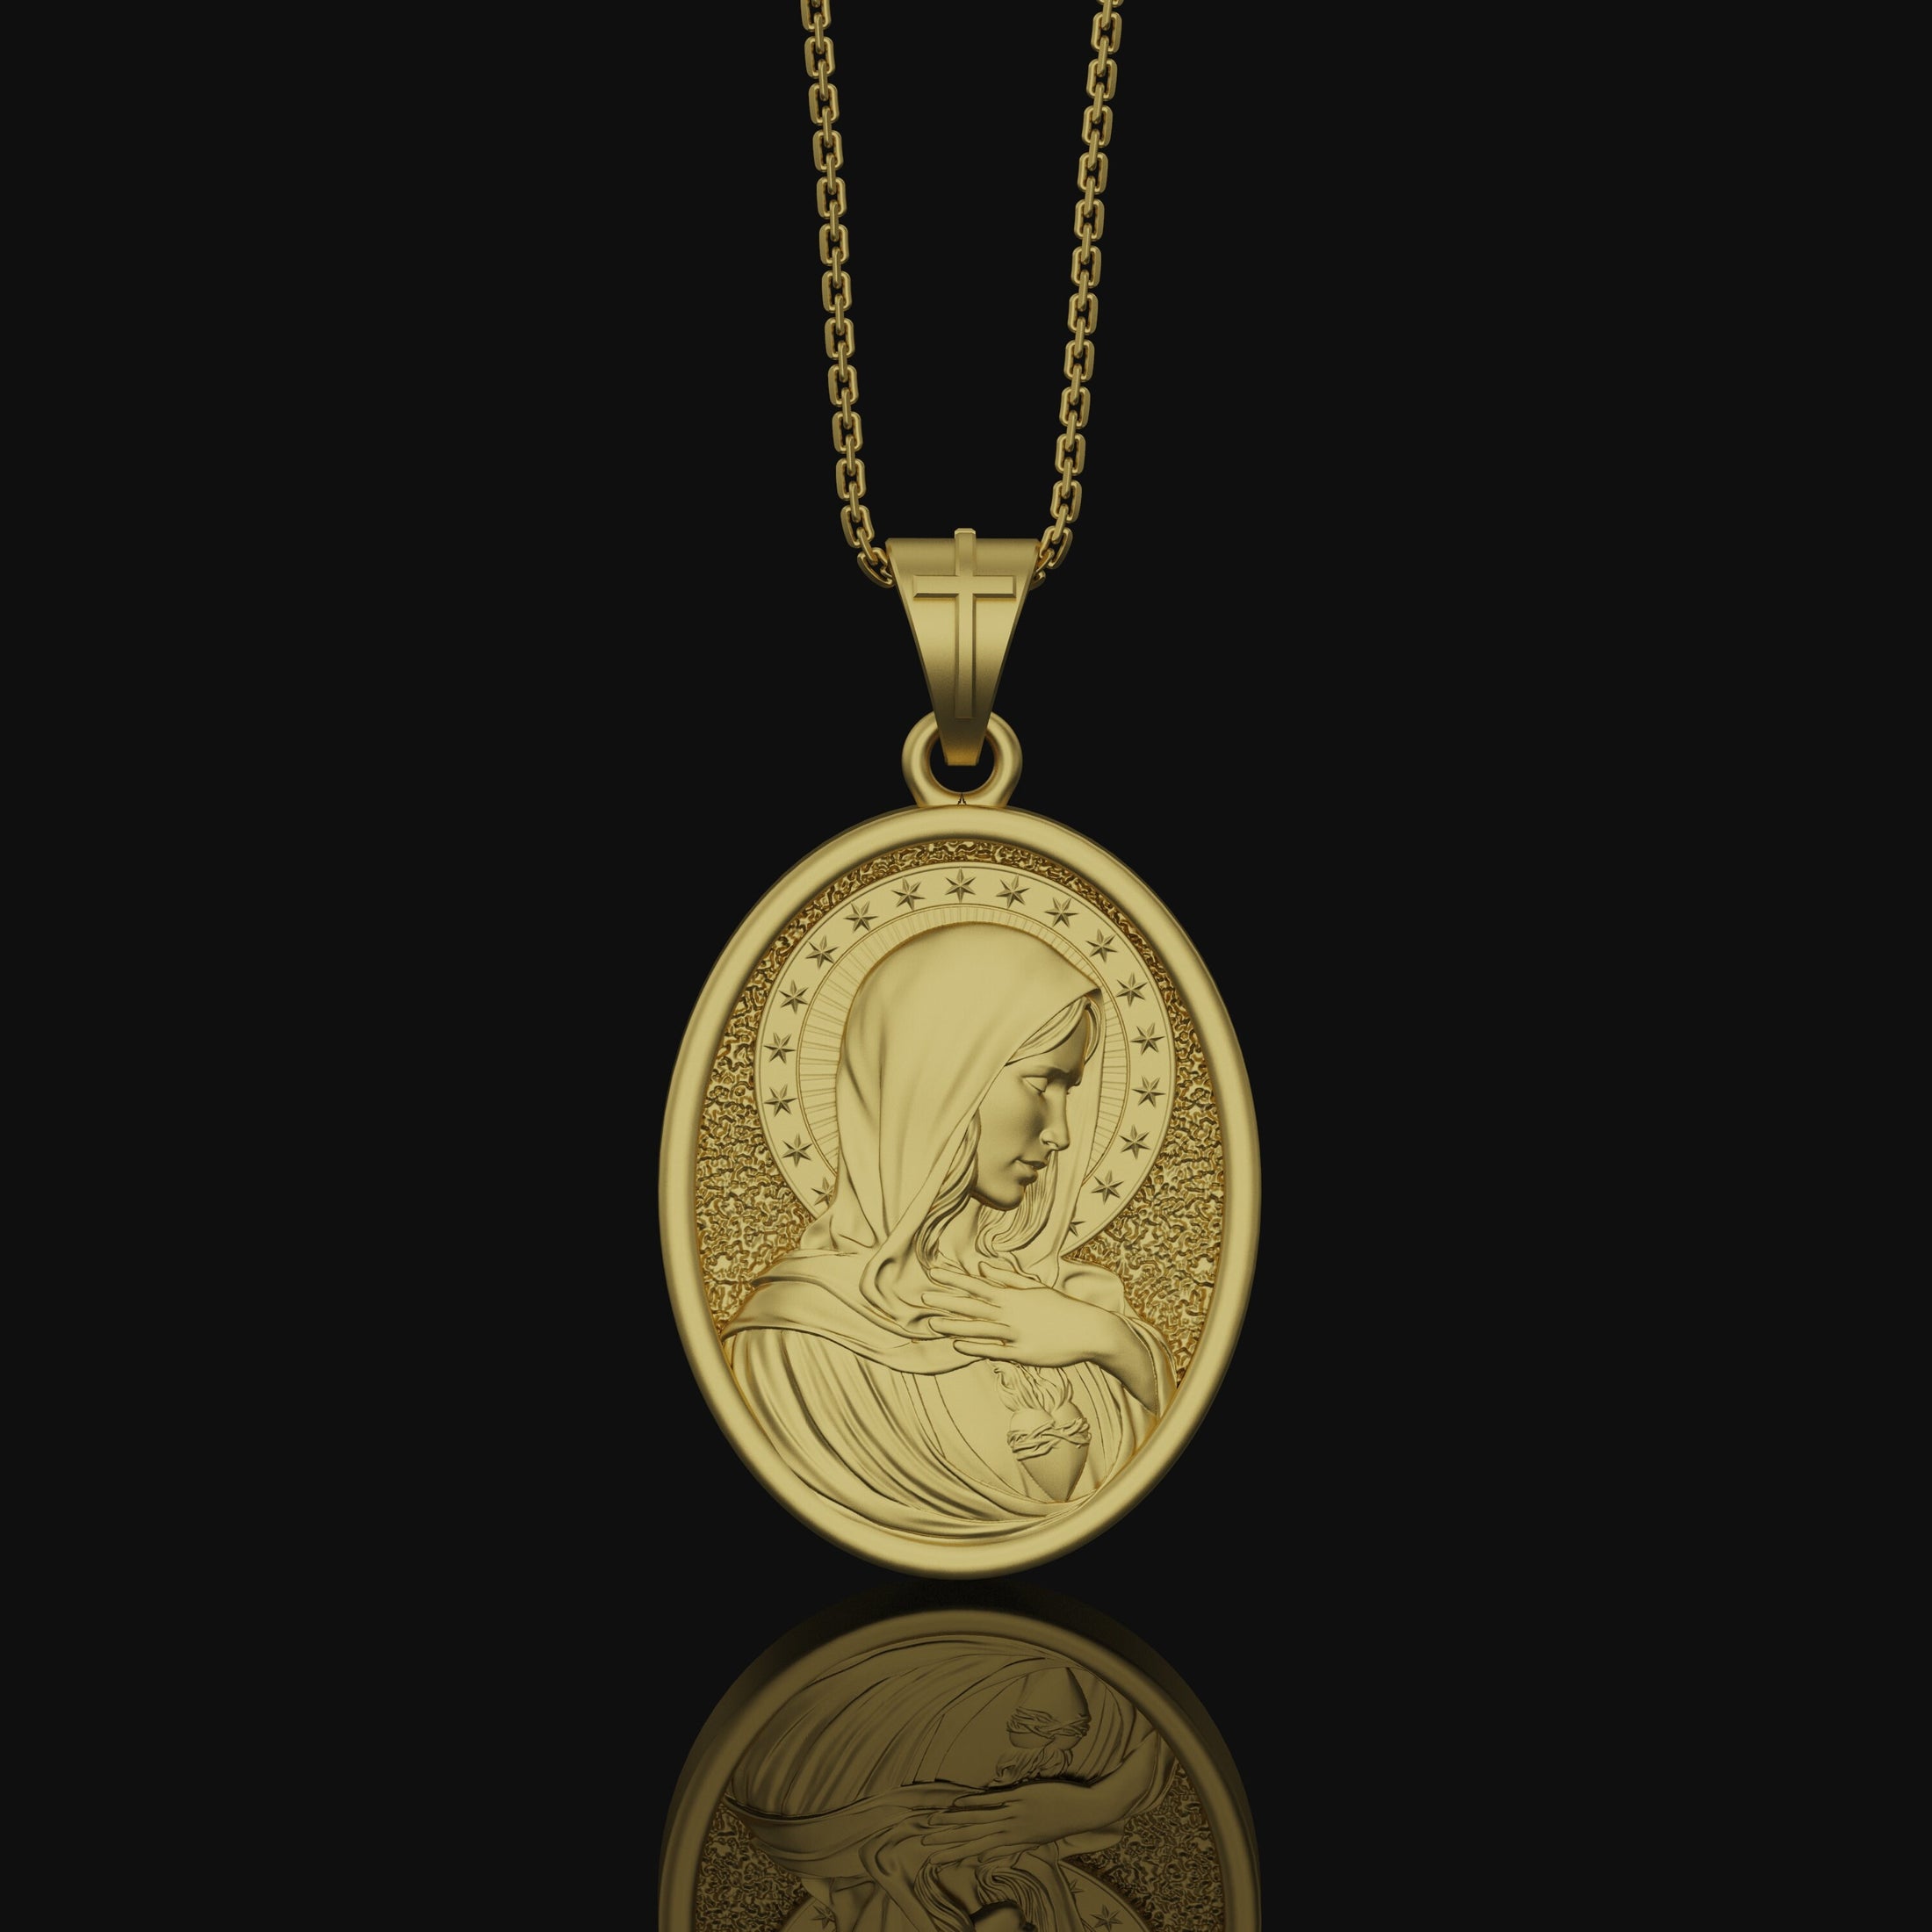 Immaculate Heart, Virgin Mary, Mother Of Jesus, Religious Jewelry, Sacred Heart Medal, Miraculous Medal, Religious Pendant Gold Finish